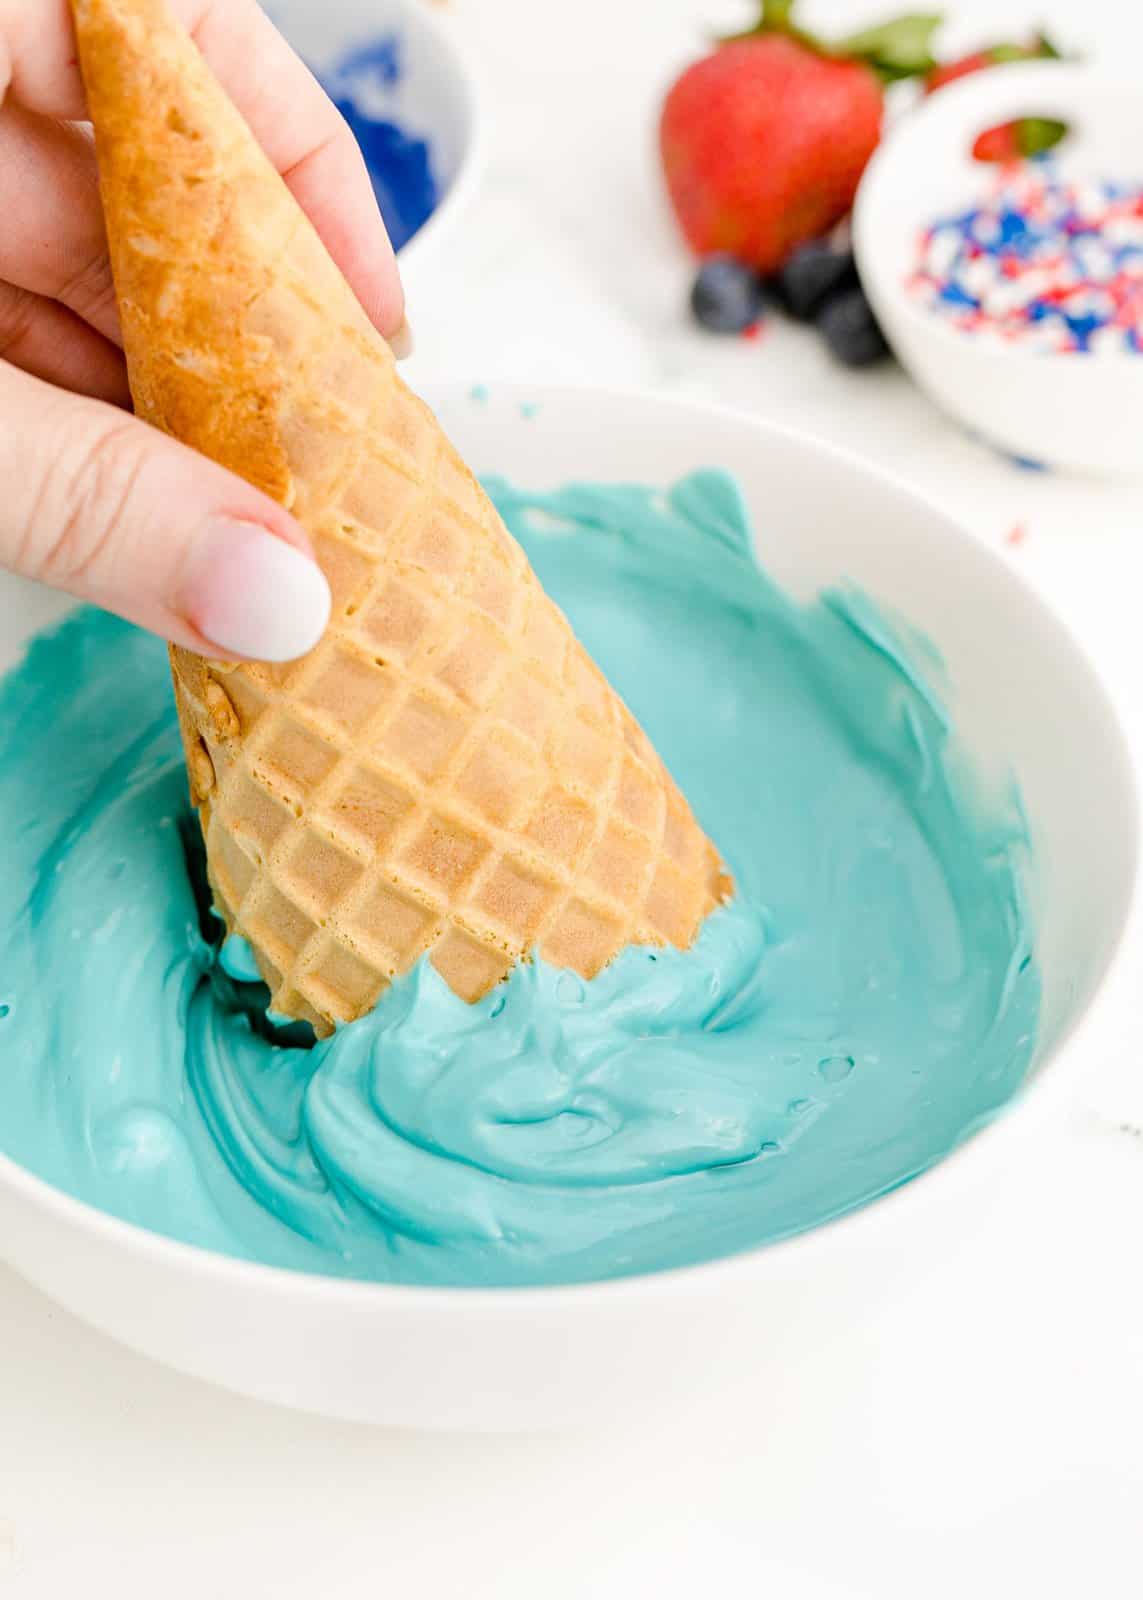 Waffle cone being dipped into candy melts.